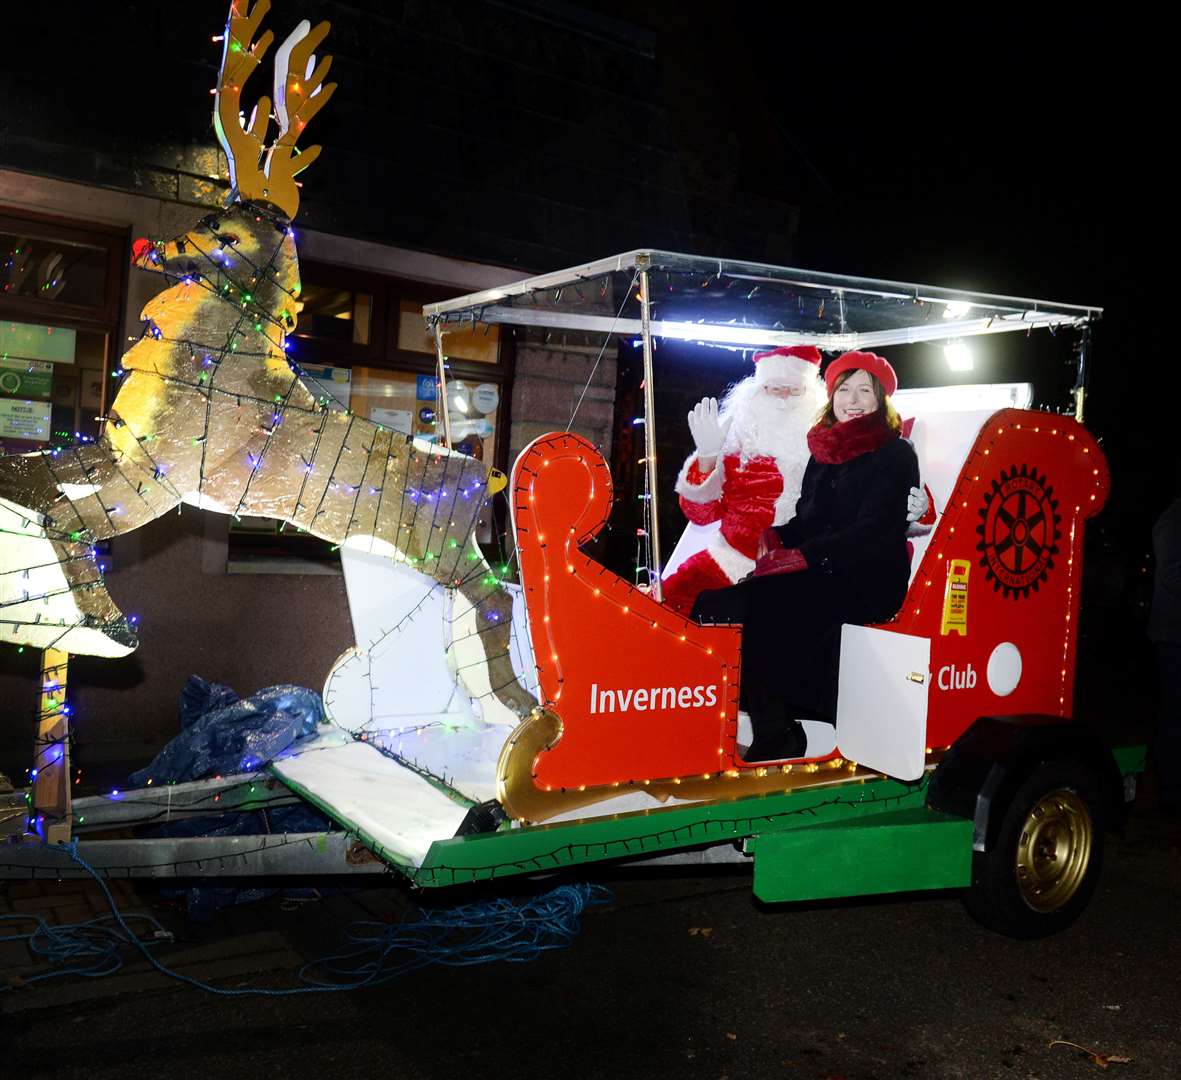 STV's Nicola McAlley joins Santa for the switch on of the lights on his new sleigh.